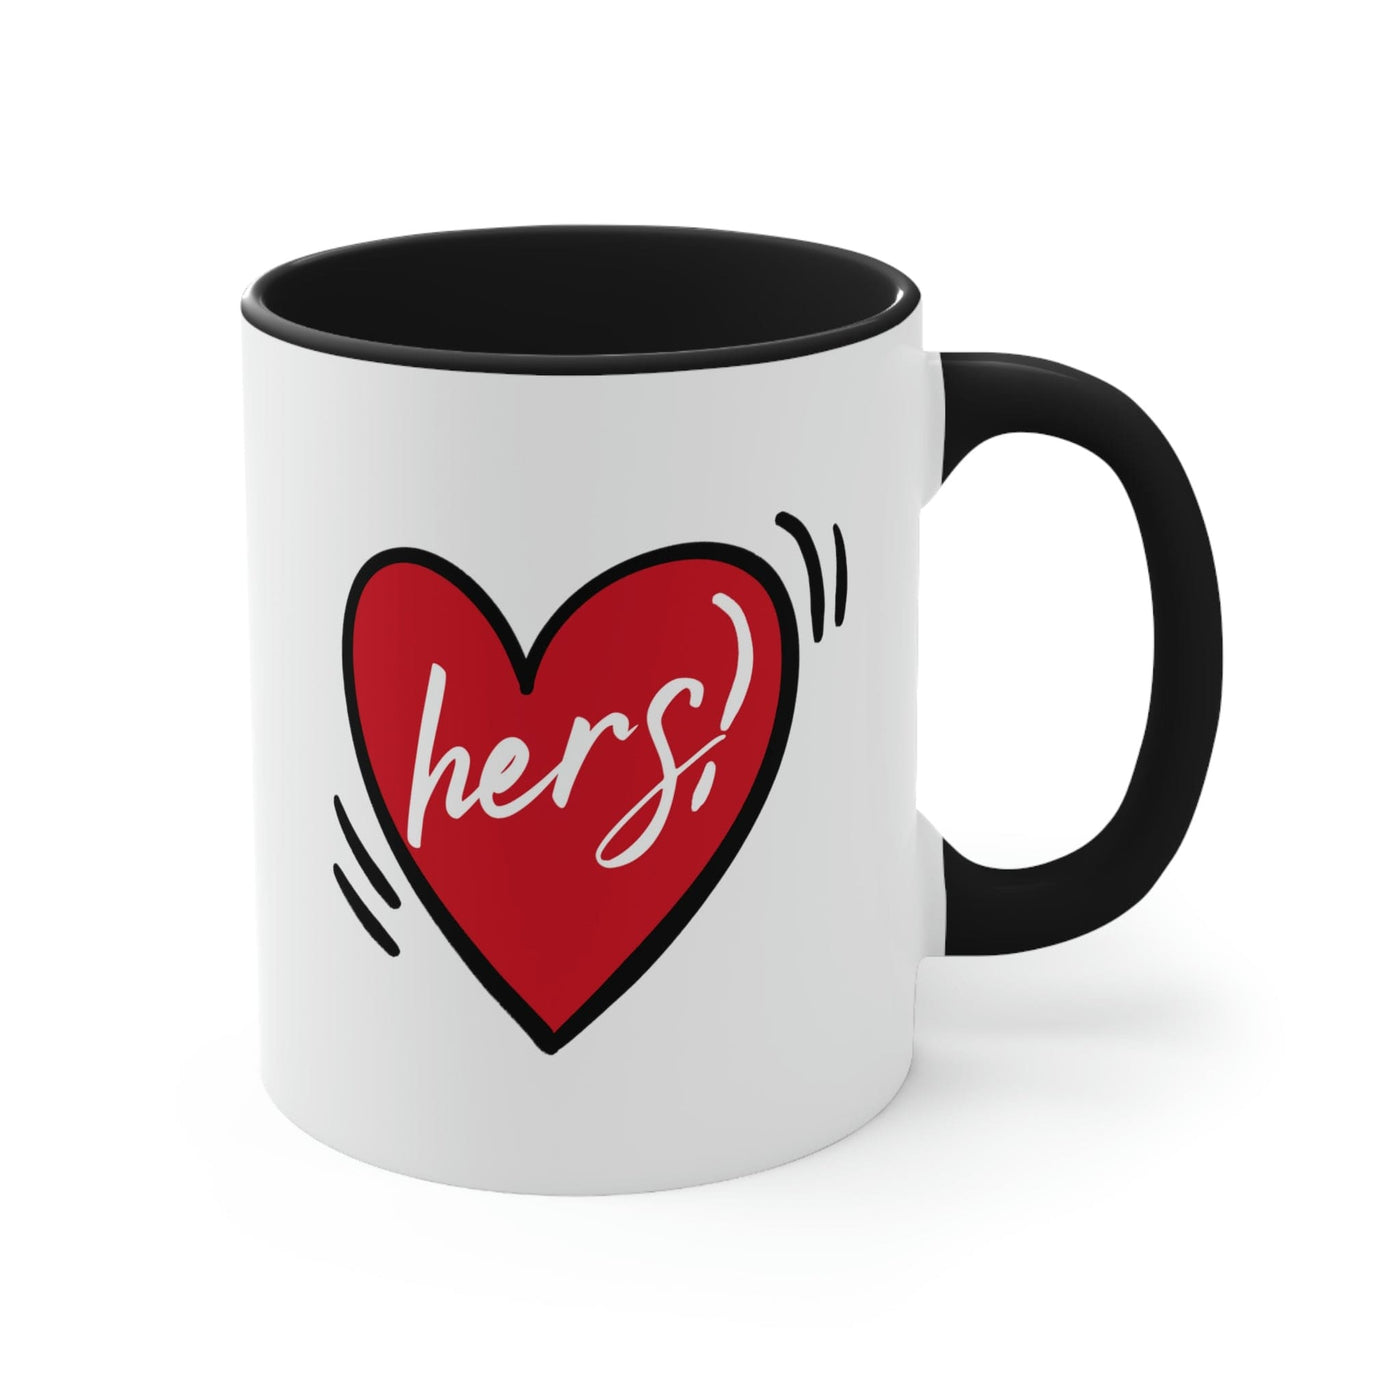 Two-tone Accent Ceramic Mug 11oz Say It Soul Her Heart Couples - Decorative